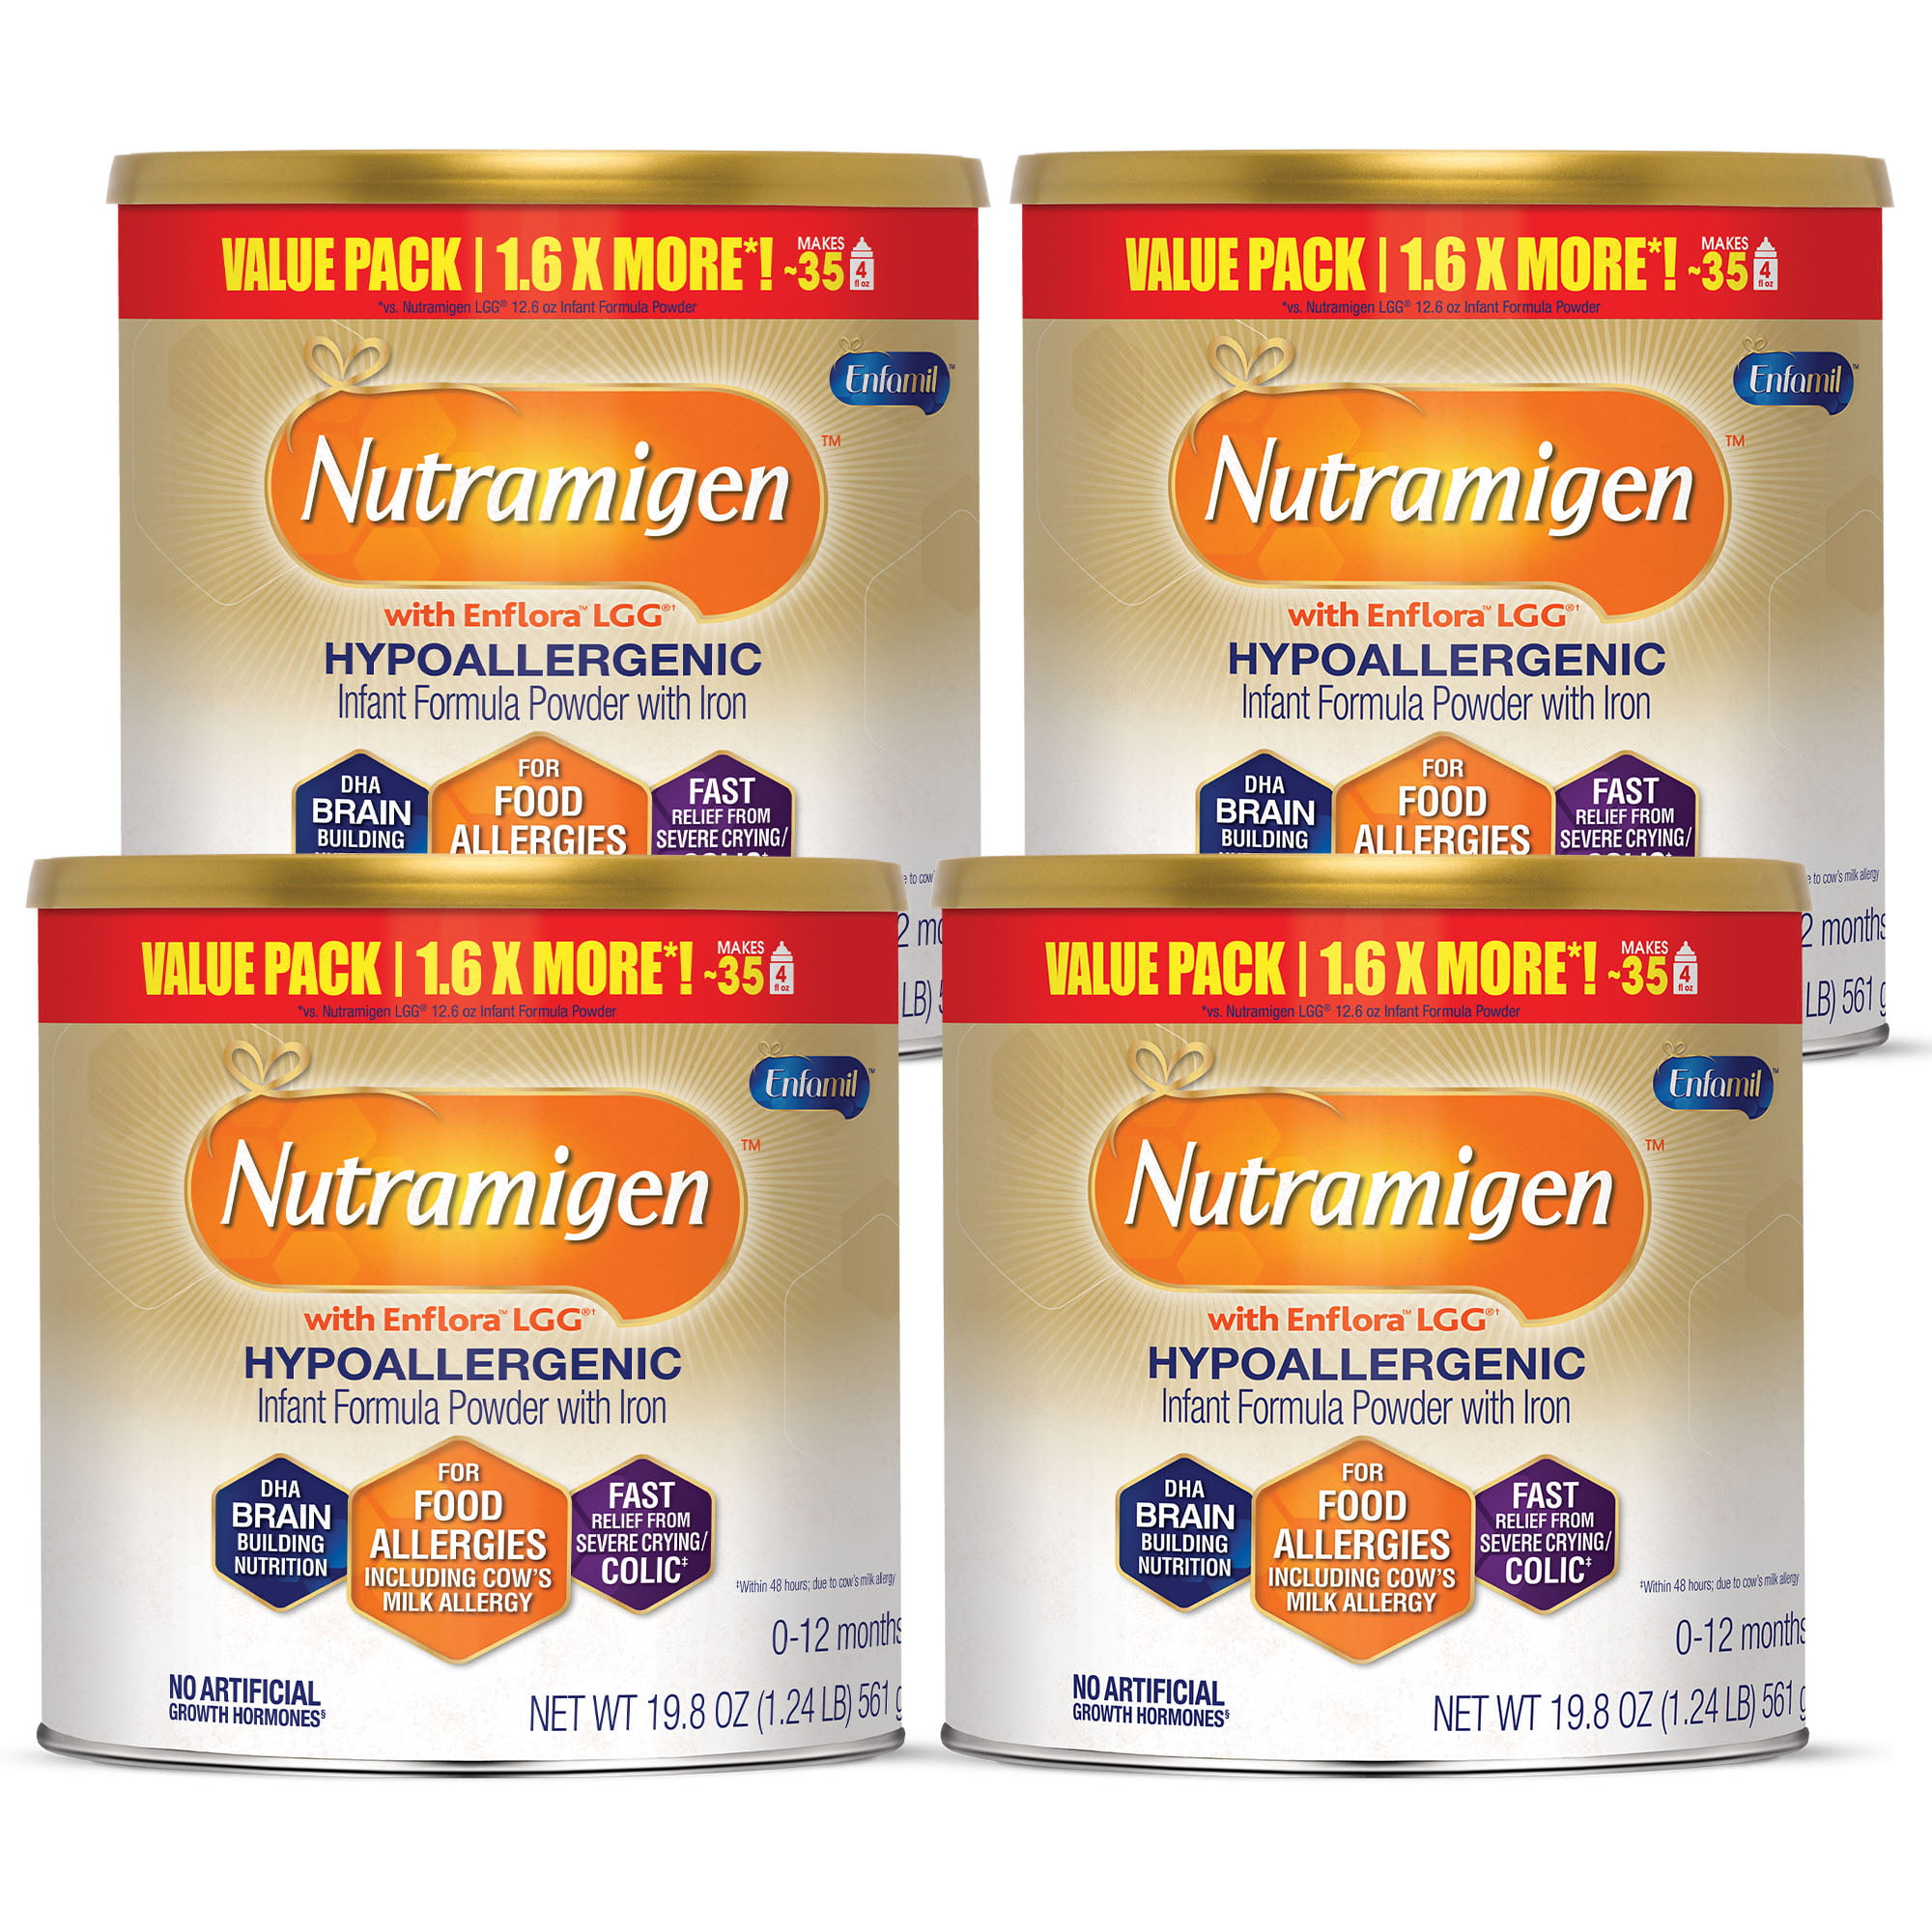 nutramigen with enflora lgg ready to feed